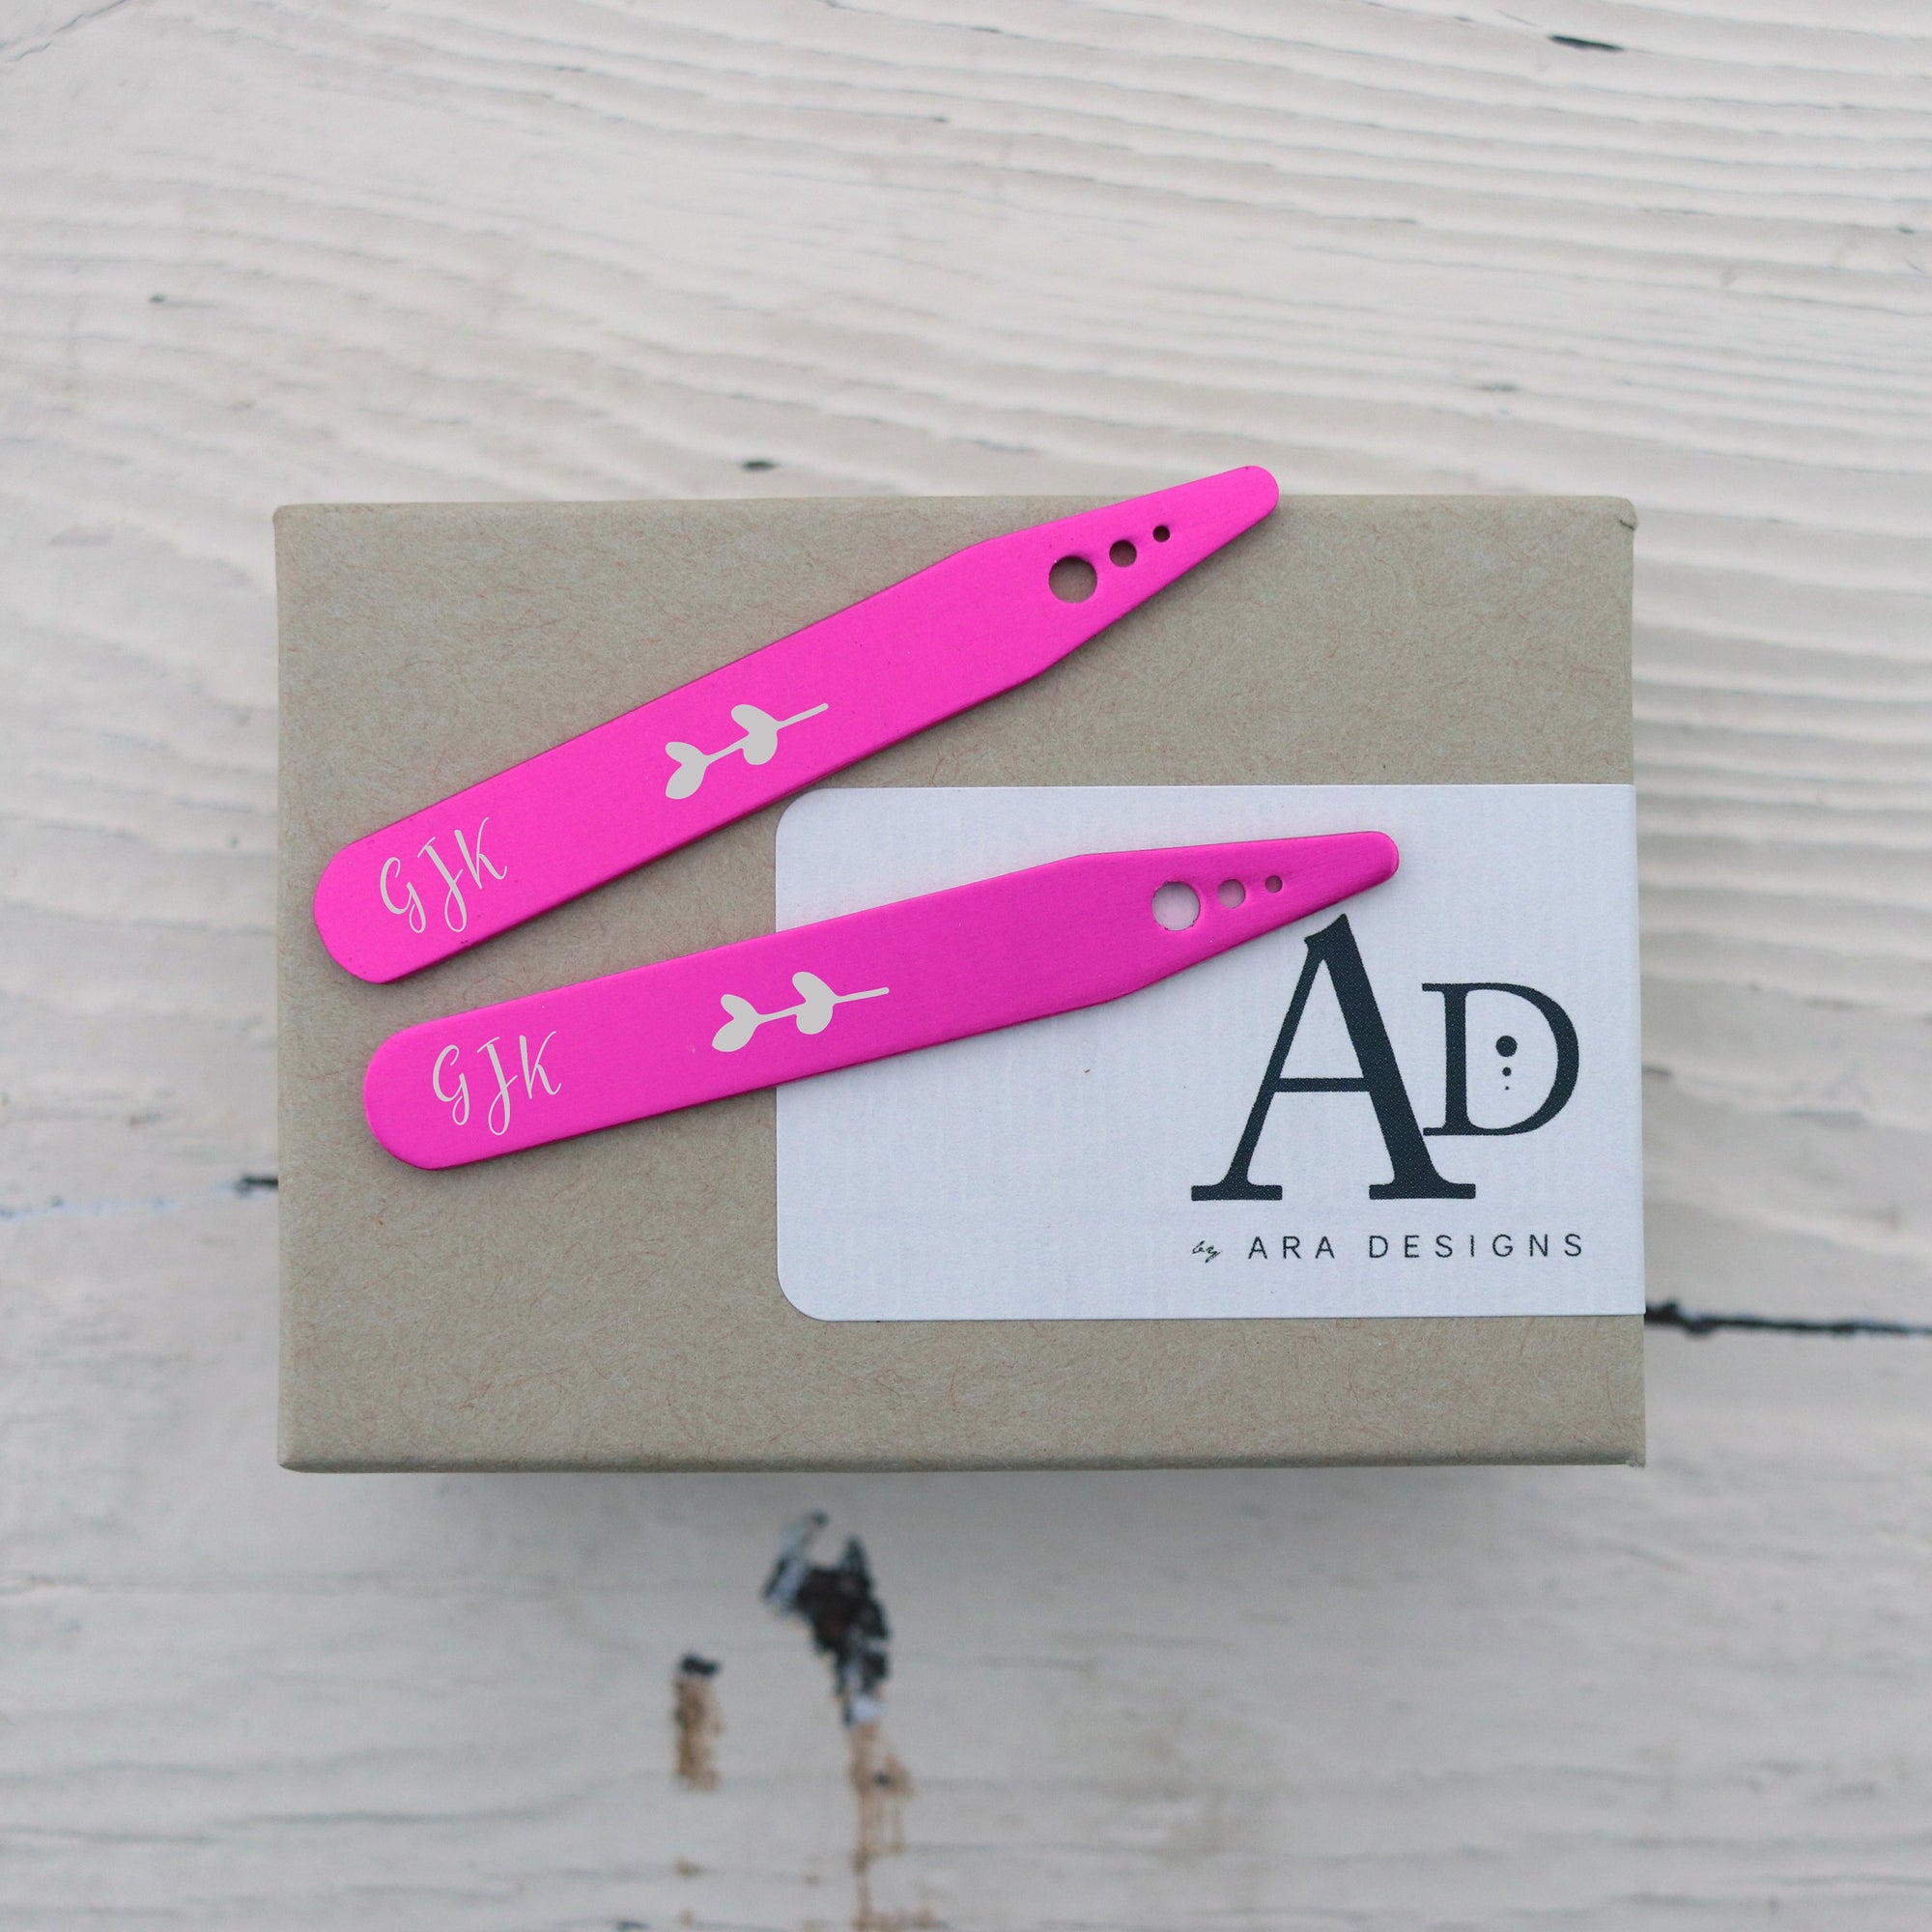 Laser Engraved Hot Pink Collar Stays, Custom Gift, Personalized for Groom, Anniversary Gift for Husband or Boyfriend,  LGC10507